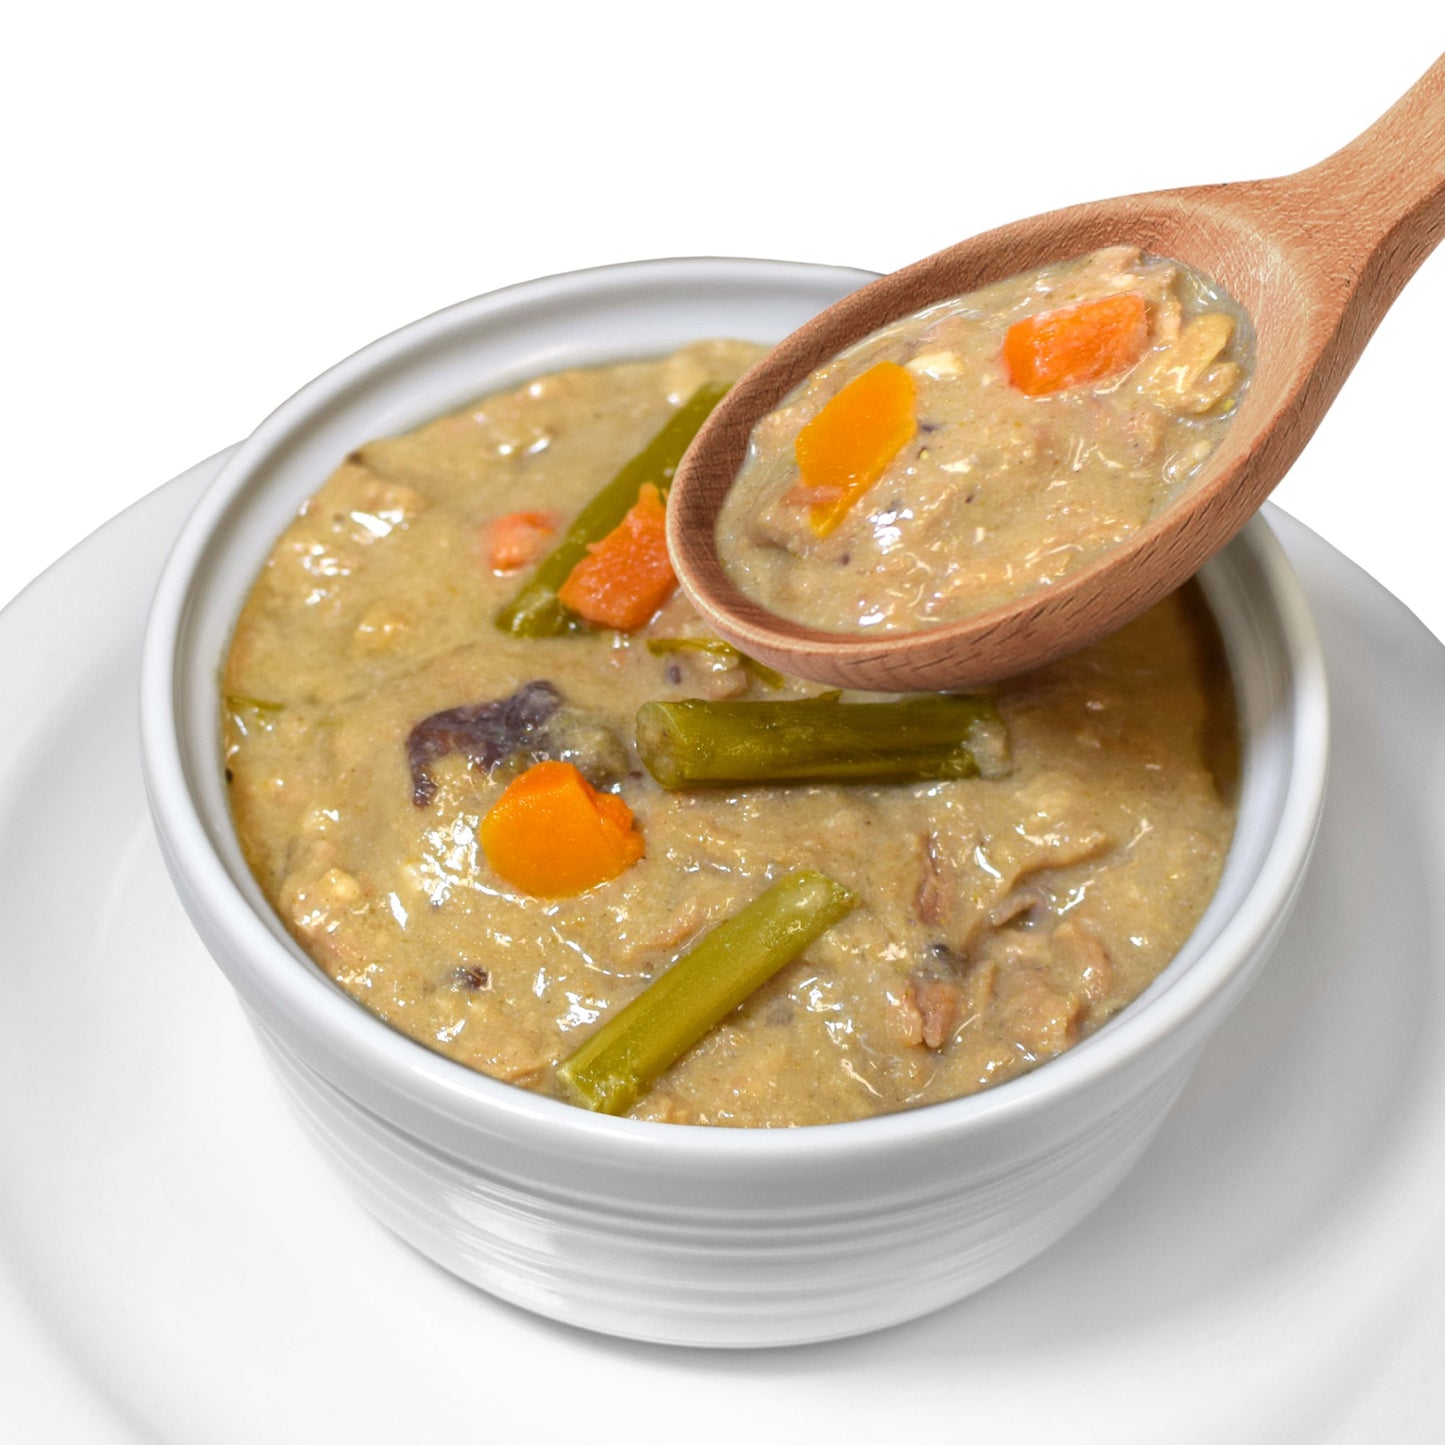 Lotus Grain Free Wholesome Pork Stew Canned Dog Food